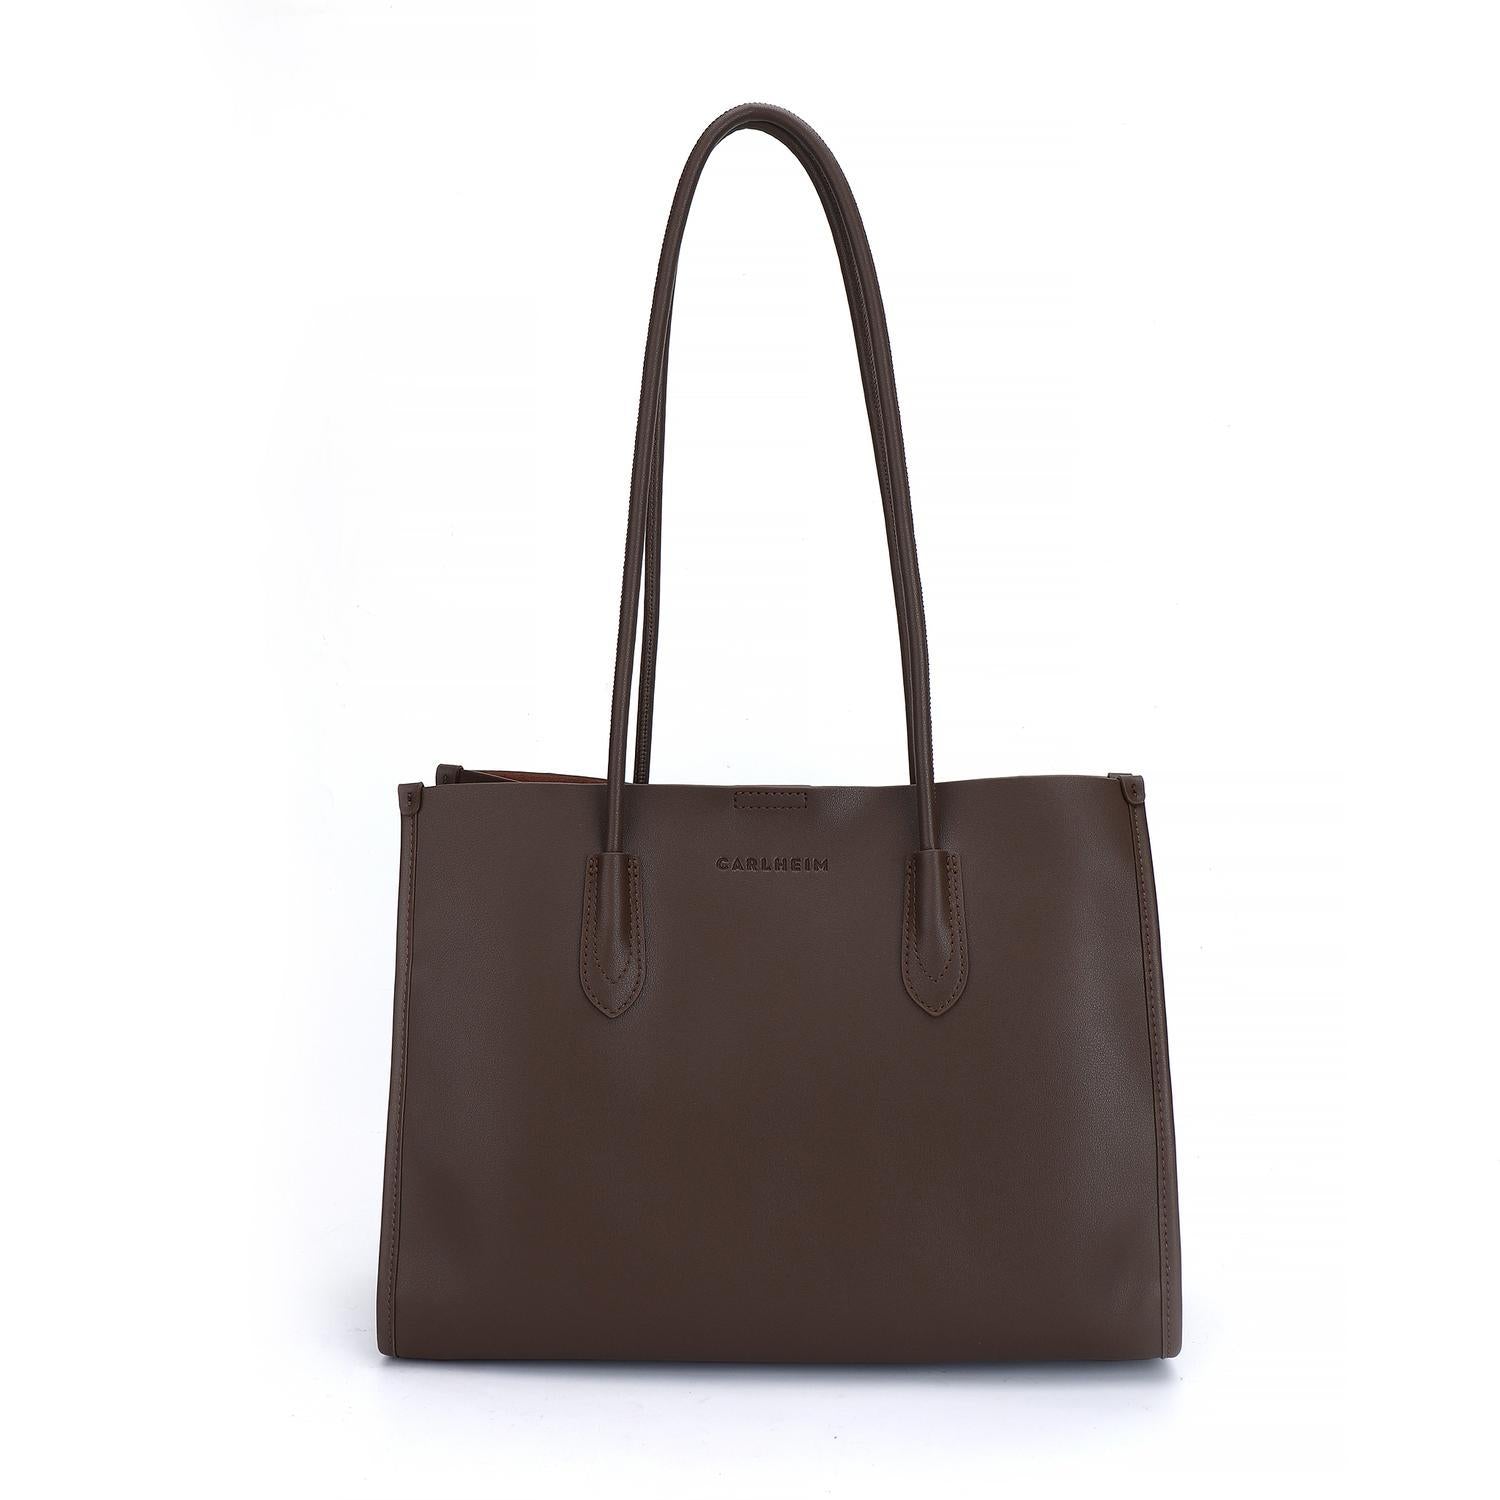 Olive Cypress Tote | Leather Tote bag made in the USA by KMM & Co.